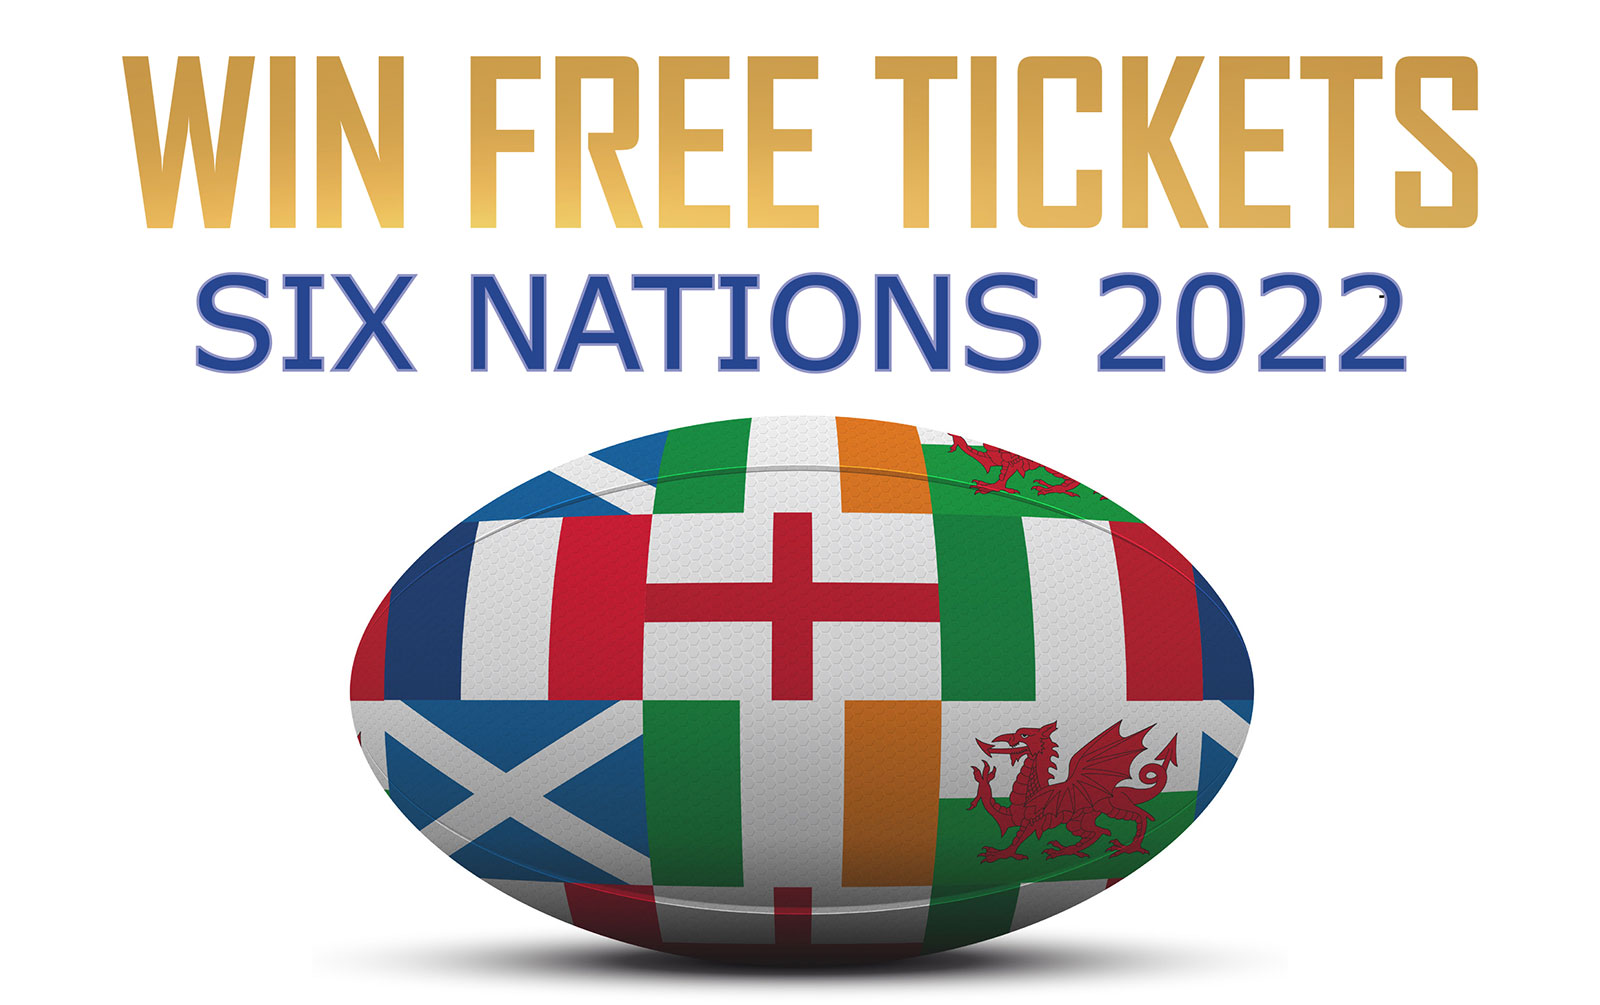 Win Free Tickets To The Six Nations 2022